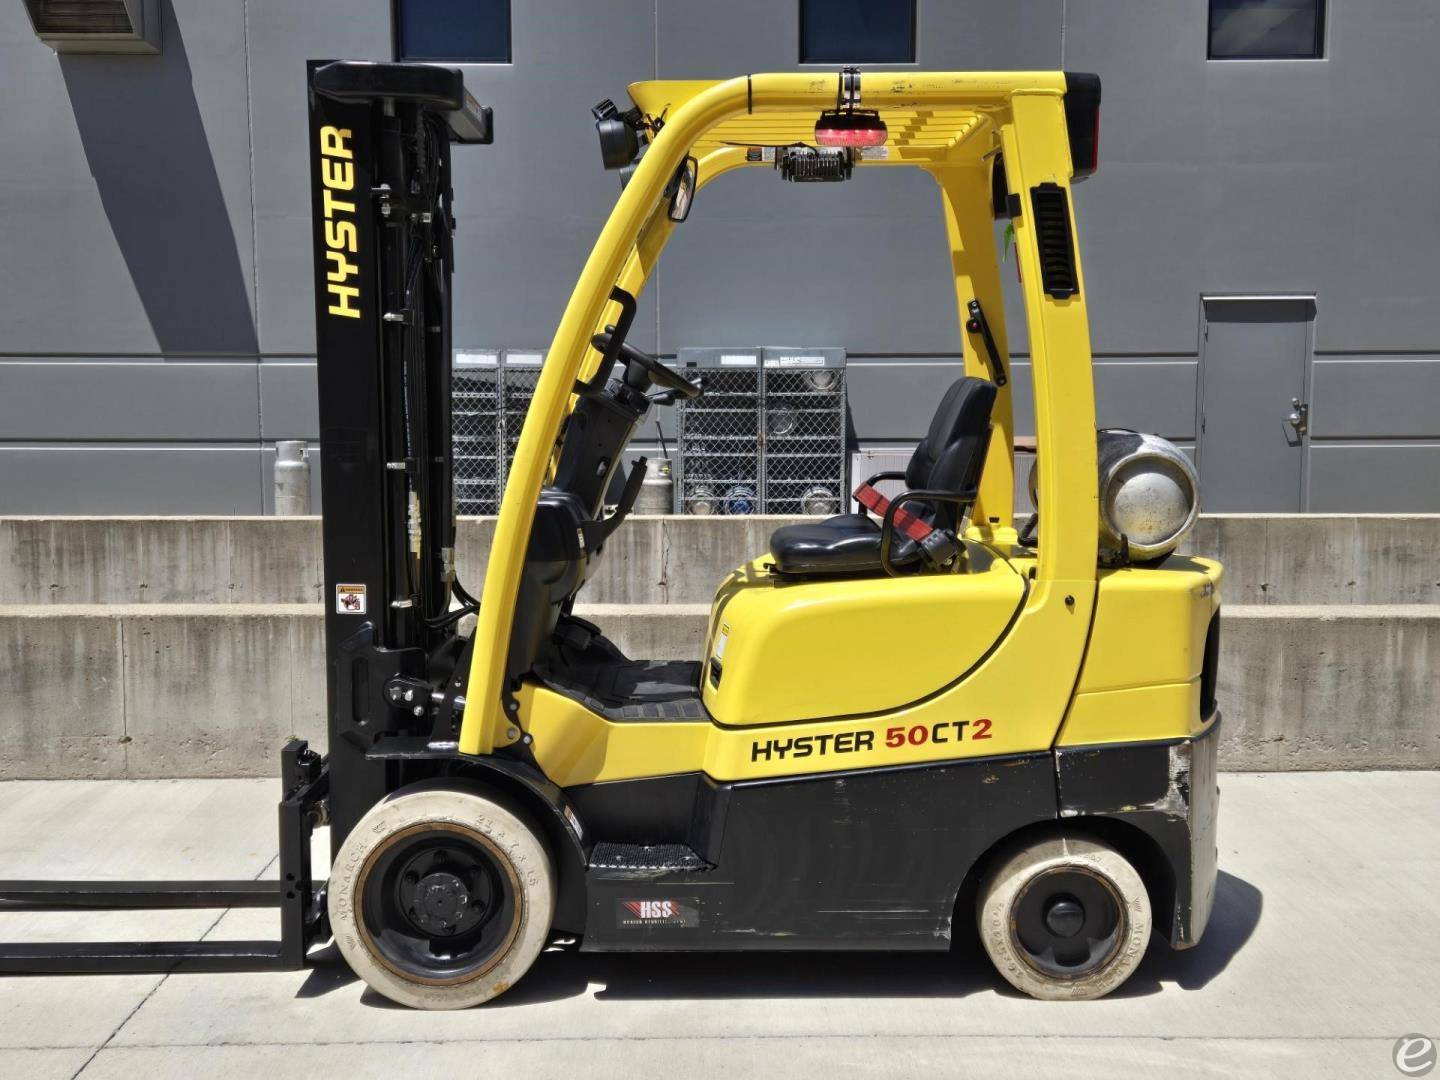 2021 Hyster S50CT2 Cushion Tire Forklift - 123Forklift